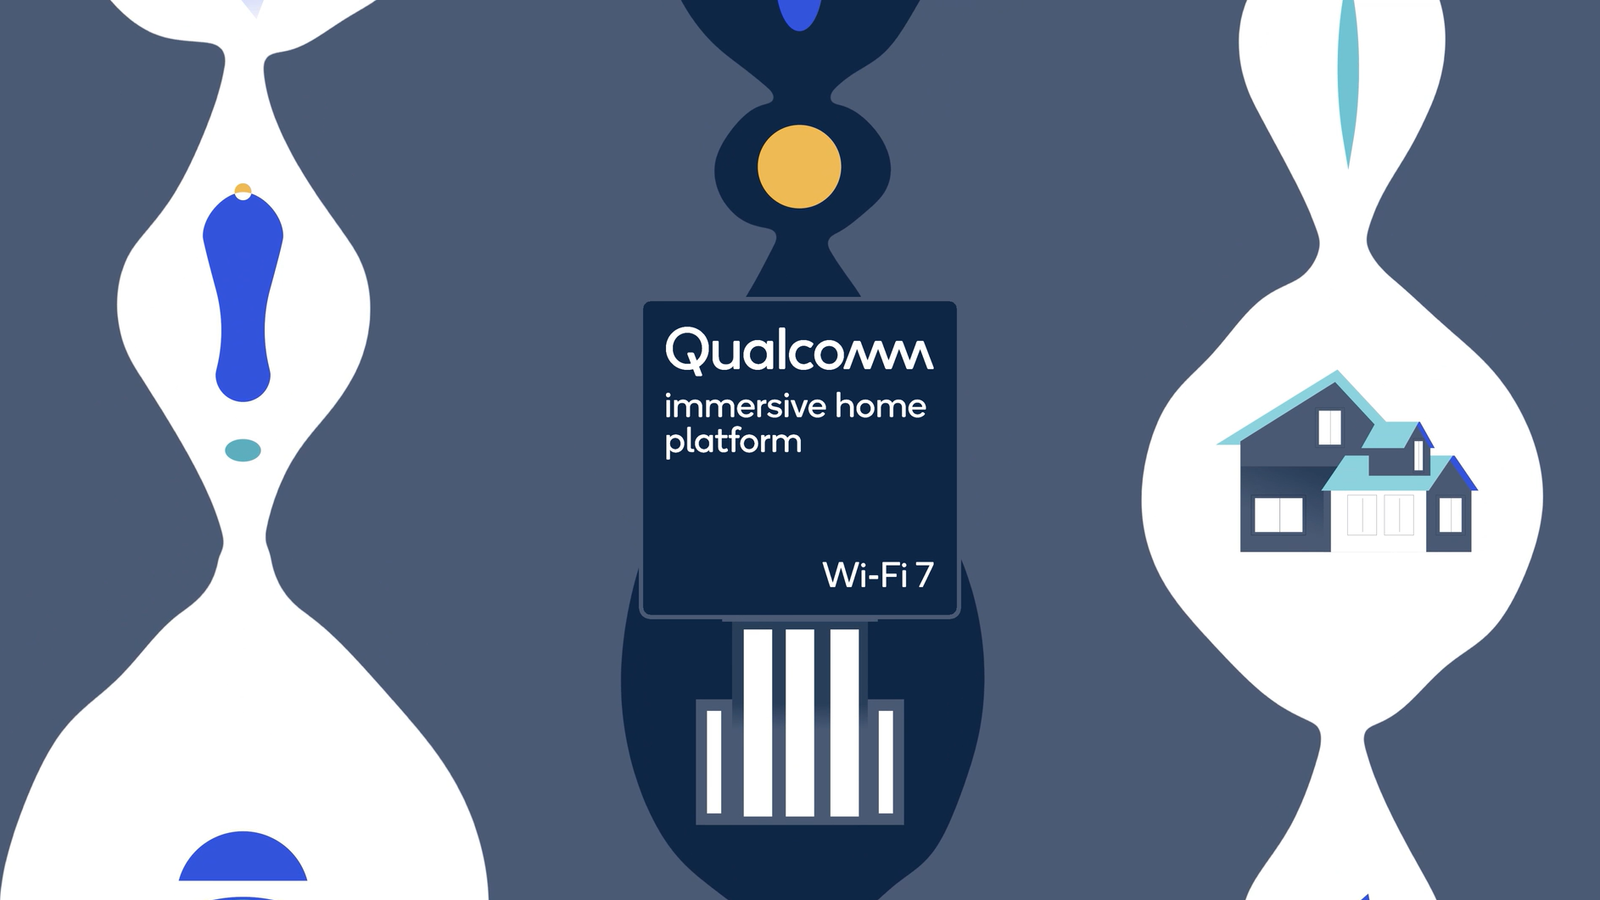 Qualcomm debuts fresh Immersive Dwelling Platforms for subsequent-gen Wi-Fi 7-capable home networks